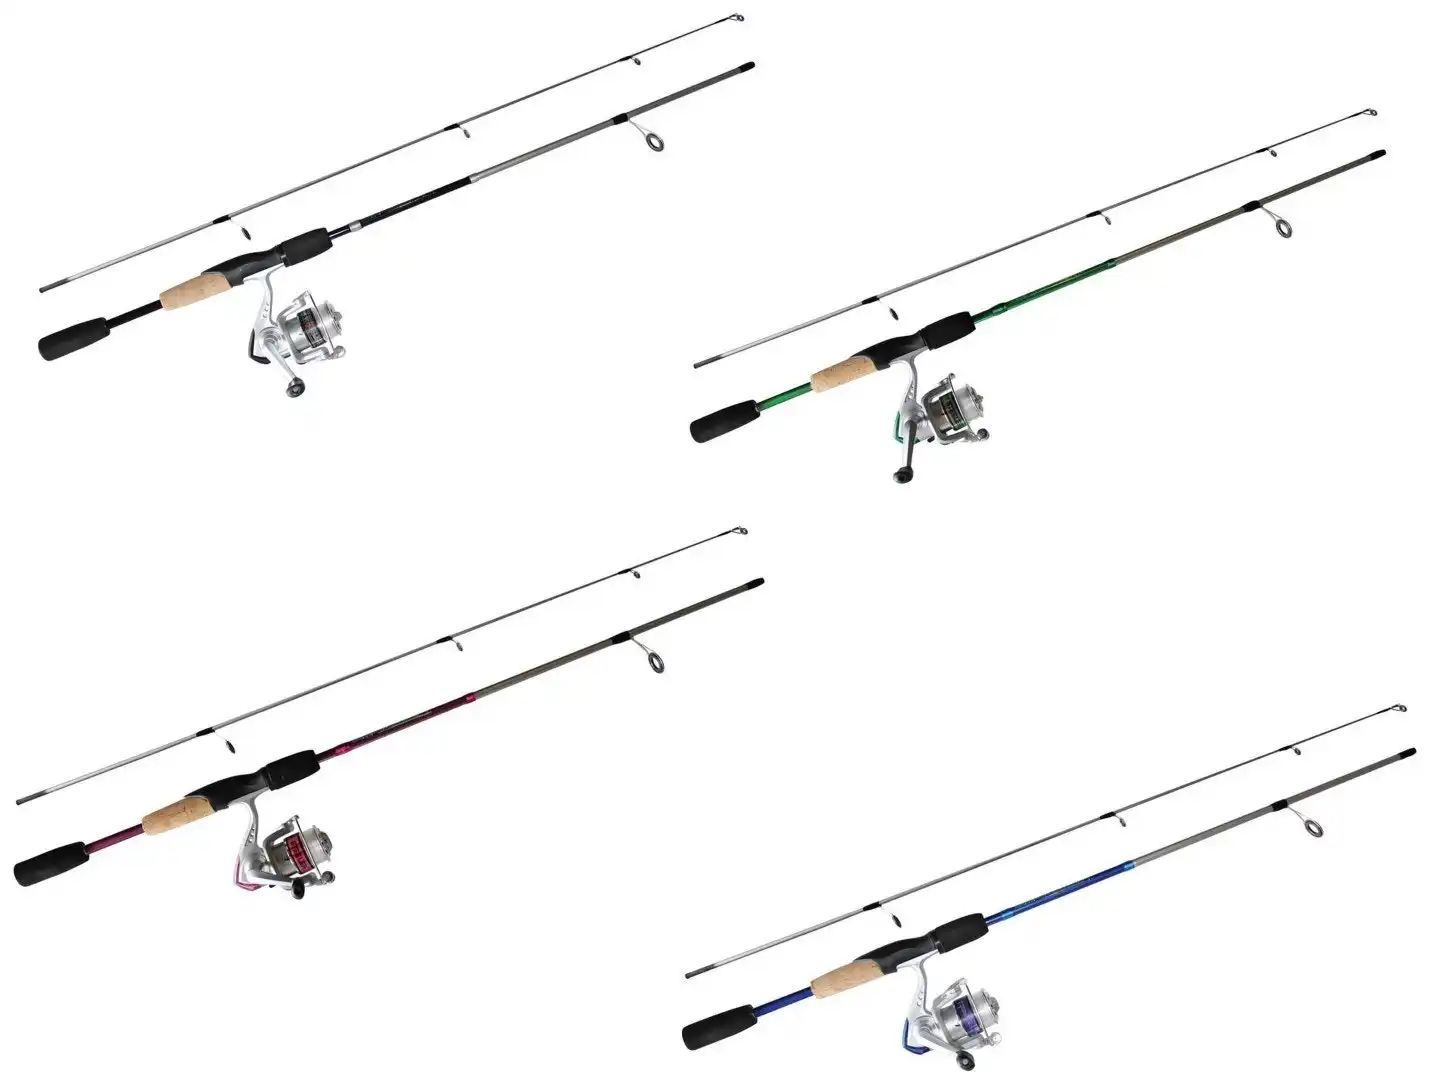 6'6 Silstar Sirius 7-12kg Fishing Rod and Reel Combo with Solid Glass Tip  -2 Pce